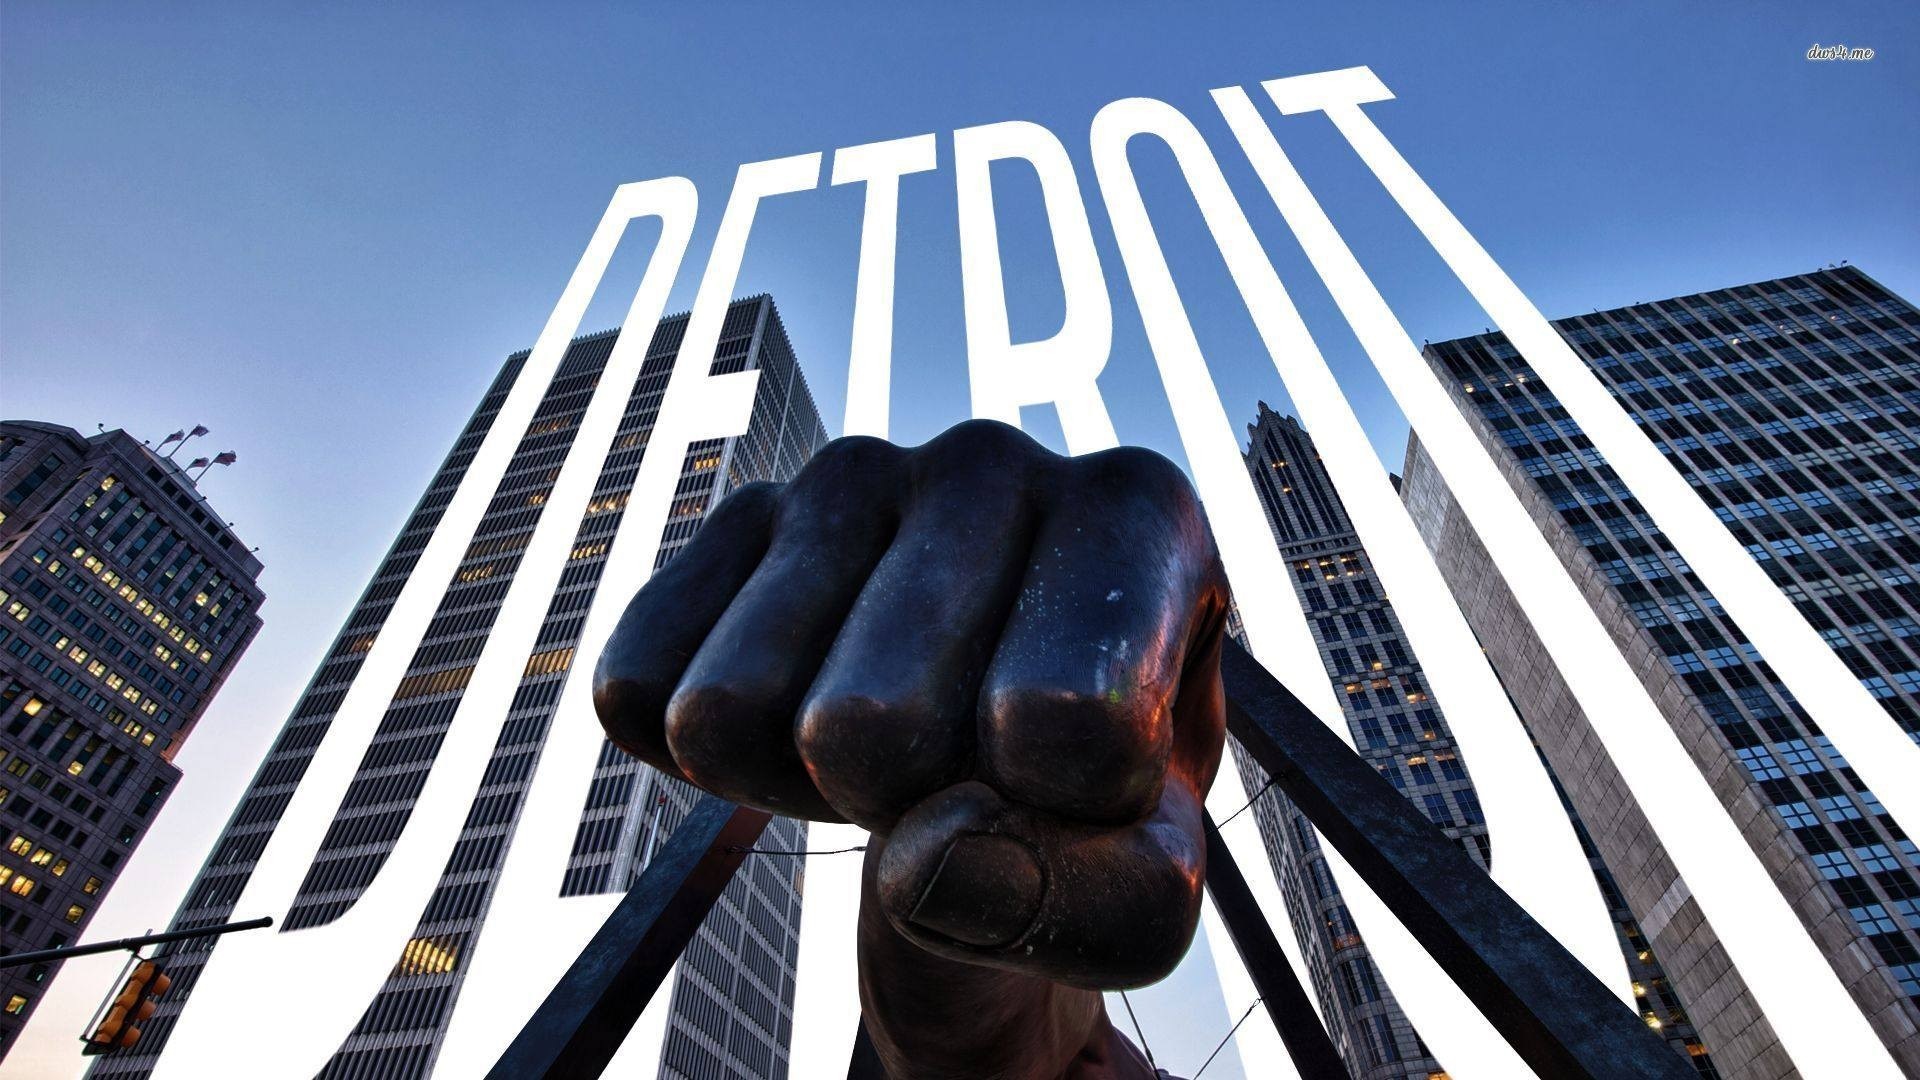 Detroit p k k hd wallpapers backgrounds free download rare gallery